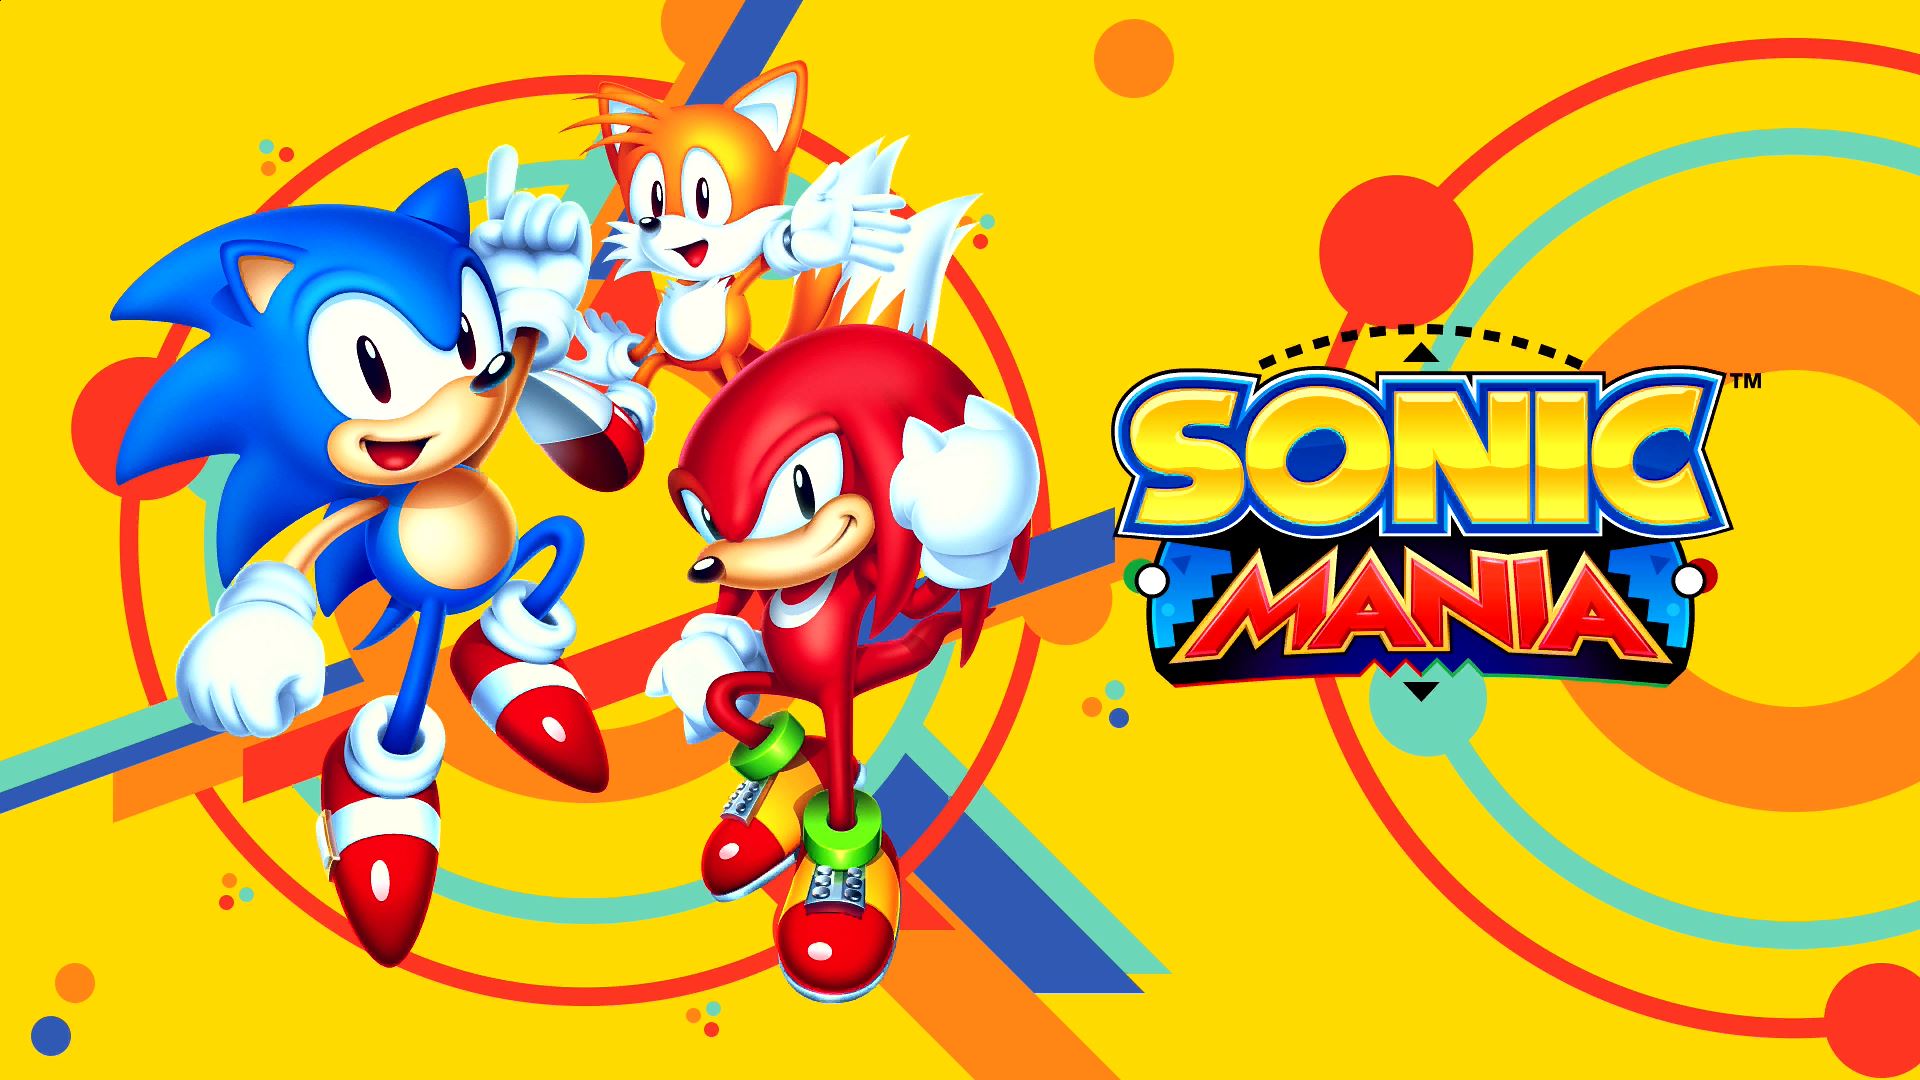 Sonic Mania (for PC) Review